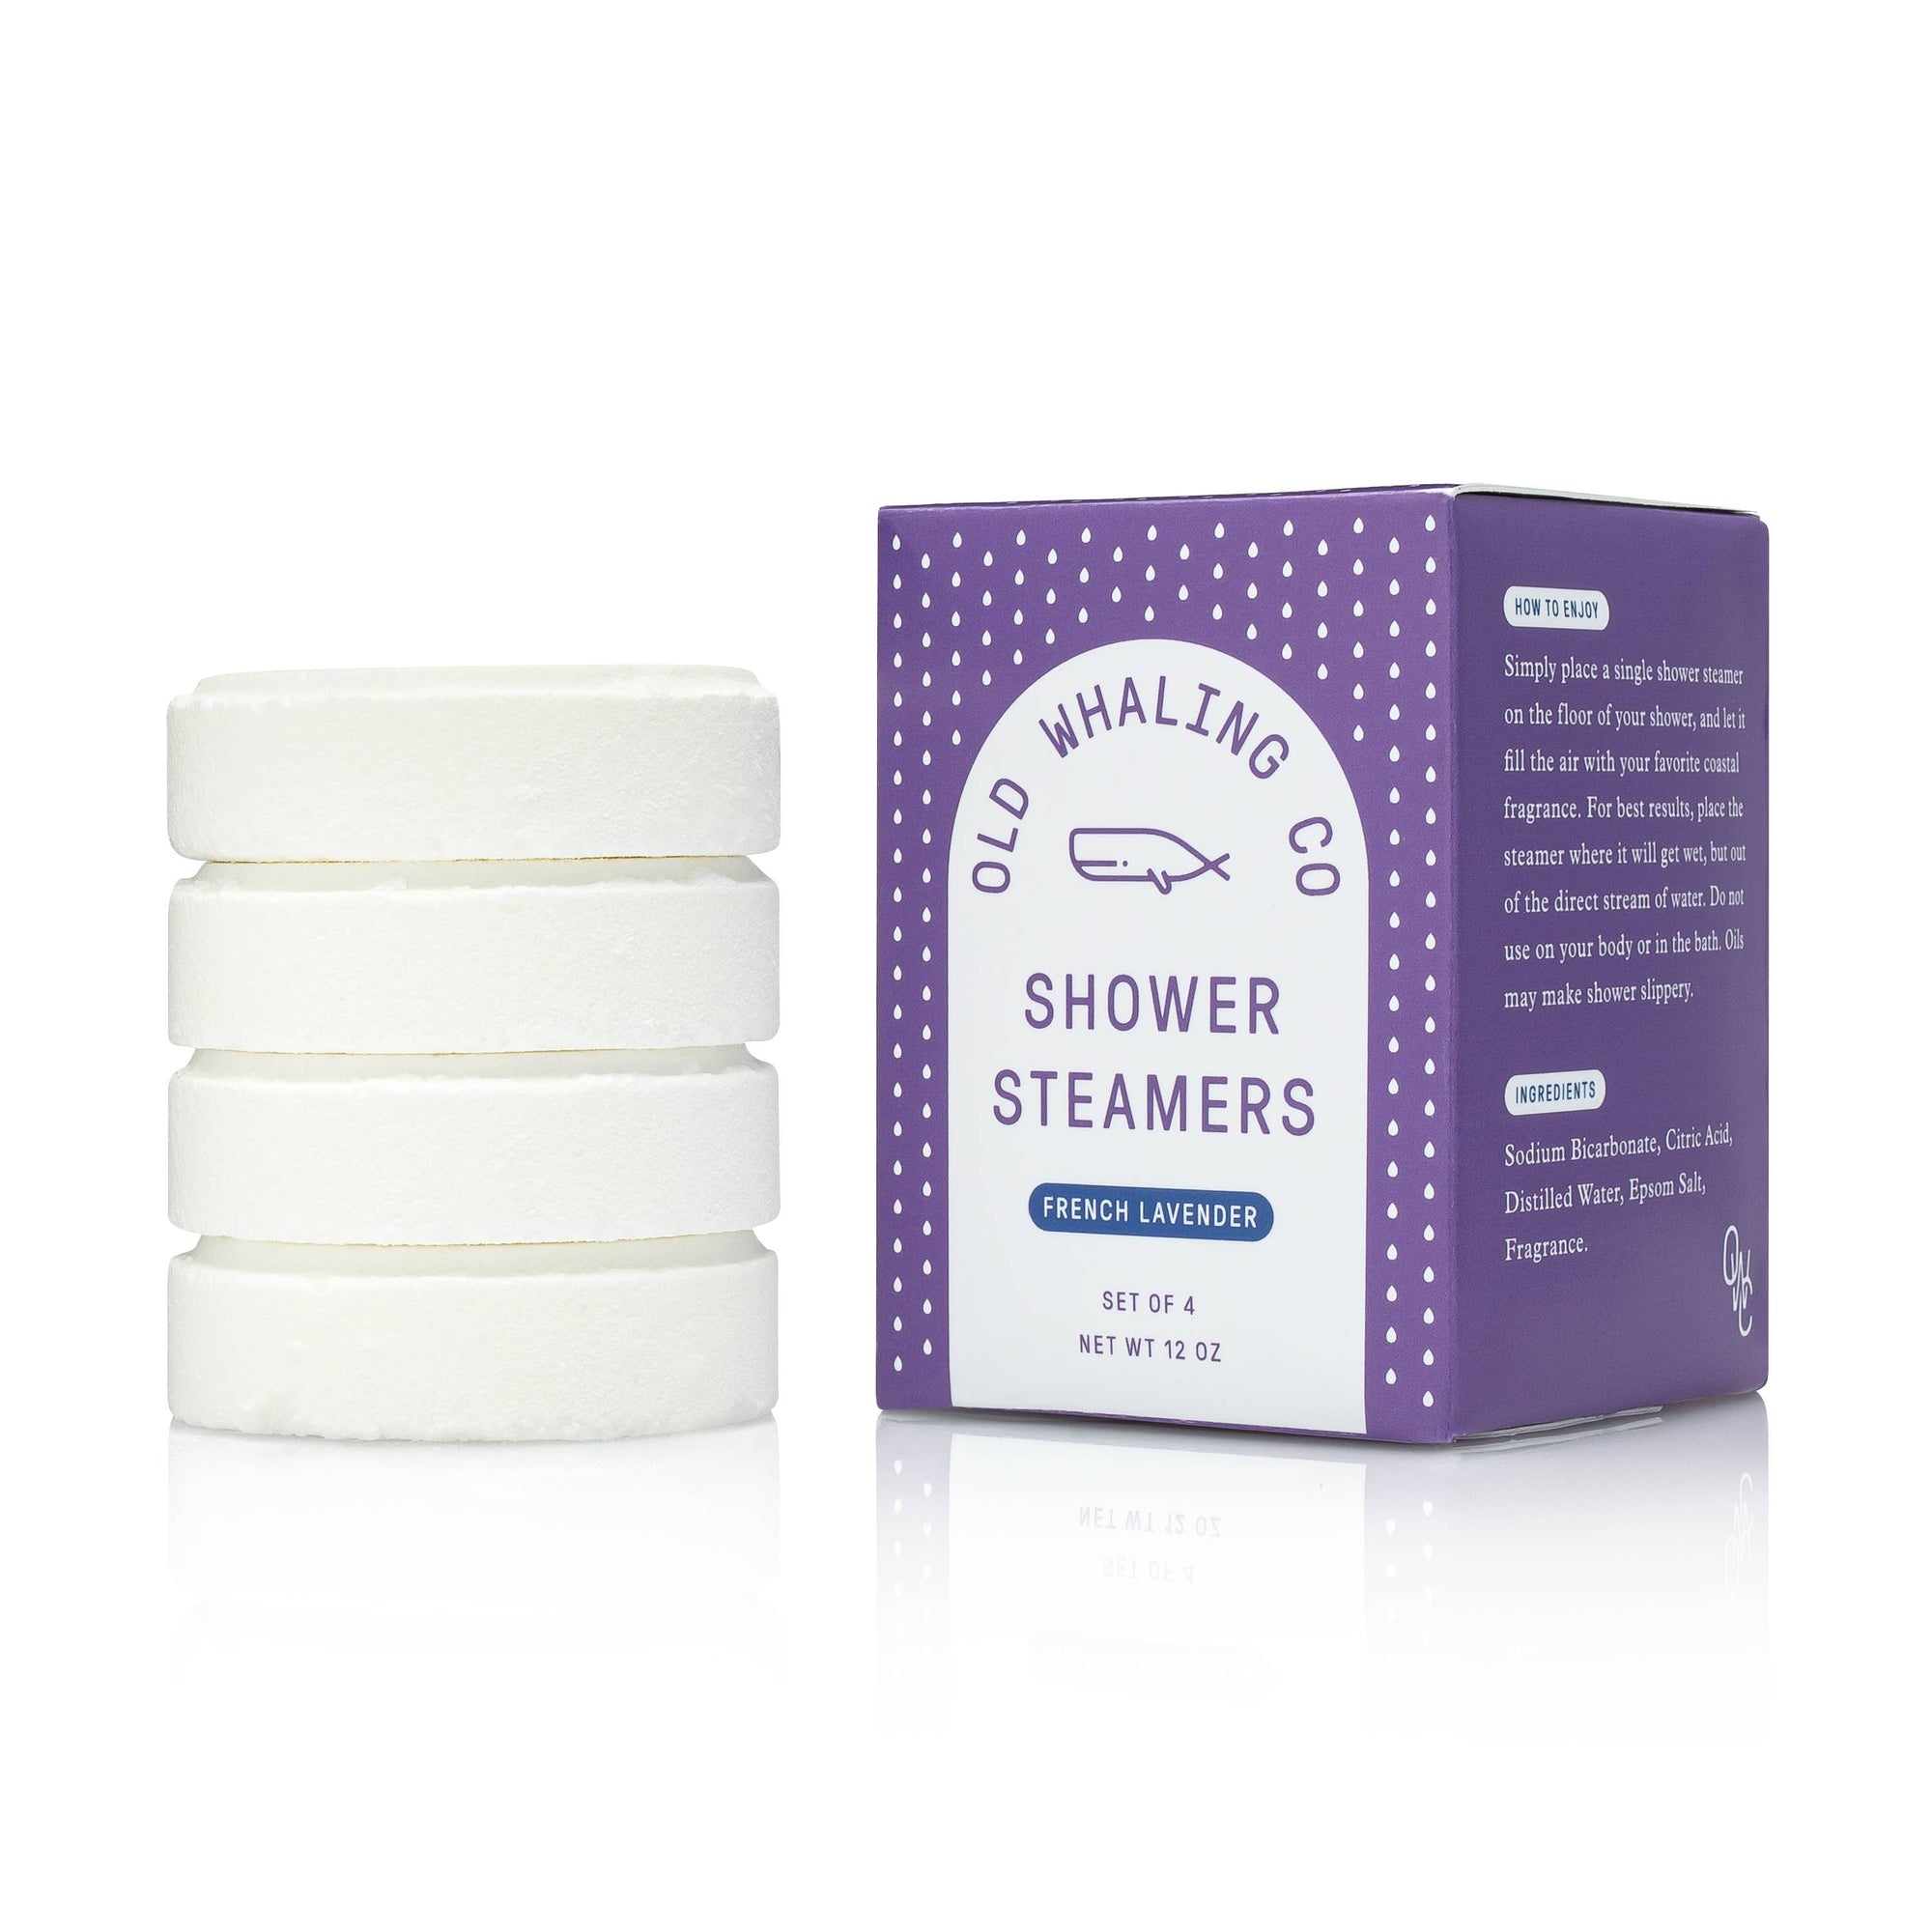 French Lavender Shower Steamers - The Preppy Bunny